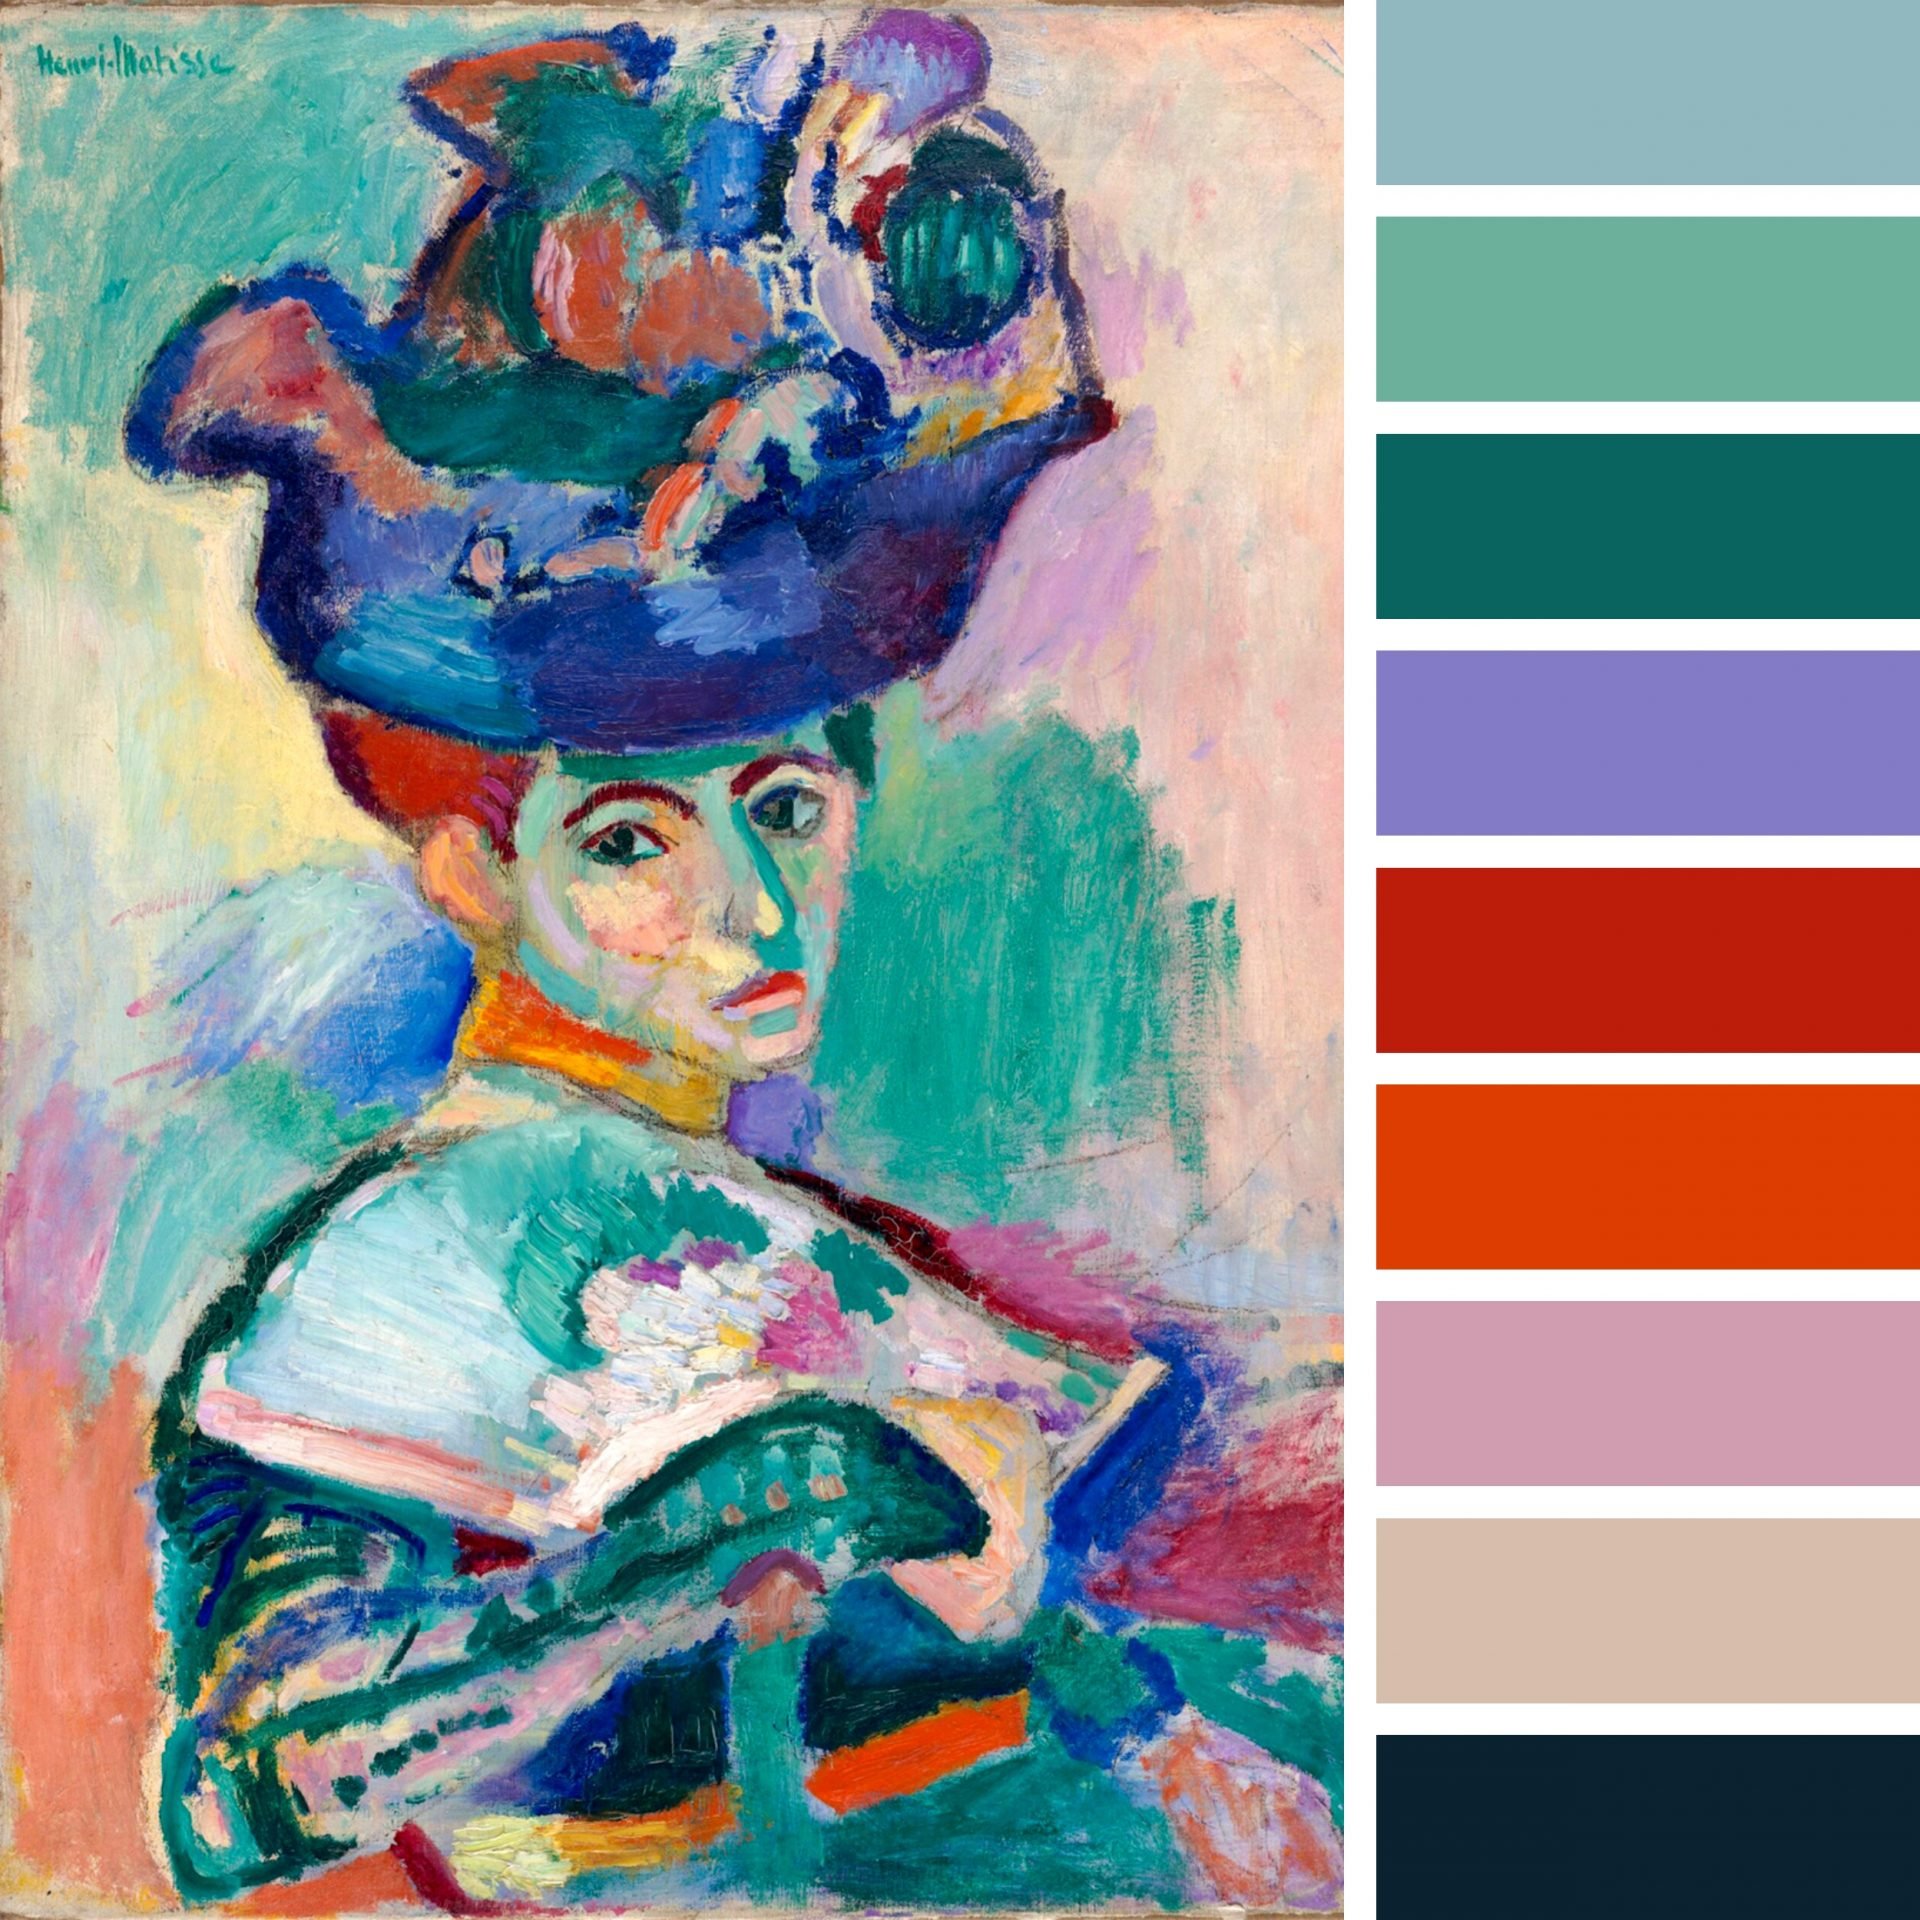 "Femme au Chapeau" (Woman with a Hat) by Henri Matisse, painted in 1905, is a Fauvist oil painting displaying an avant-garde portrait of the artist's wife, Amelie. The painting is notable for its radical use of color, characteristic of Fauvism. It features a woman with a stylized face rendered in bold hues, including a green stripe down her forehead, a blue hat with vivid floral embellishments, and accents of orange, purple, and red on her attire. The background consists of loosely applied pastels. Adjacent to the painting, a color palette strip shows the range of colors used in the artwork, including teal, seafoam green, dark purple, violet, bright orange, red, pale pink, beige, and navy blue.